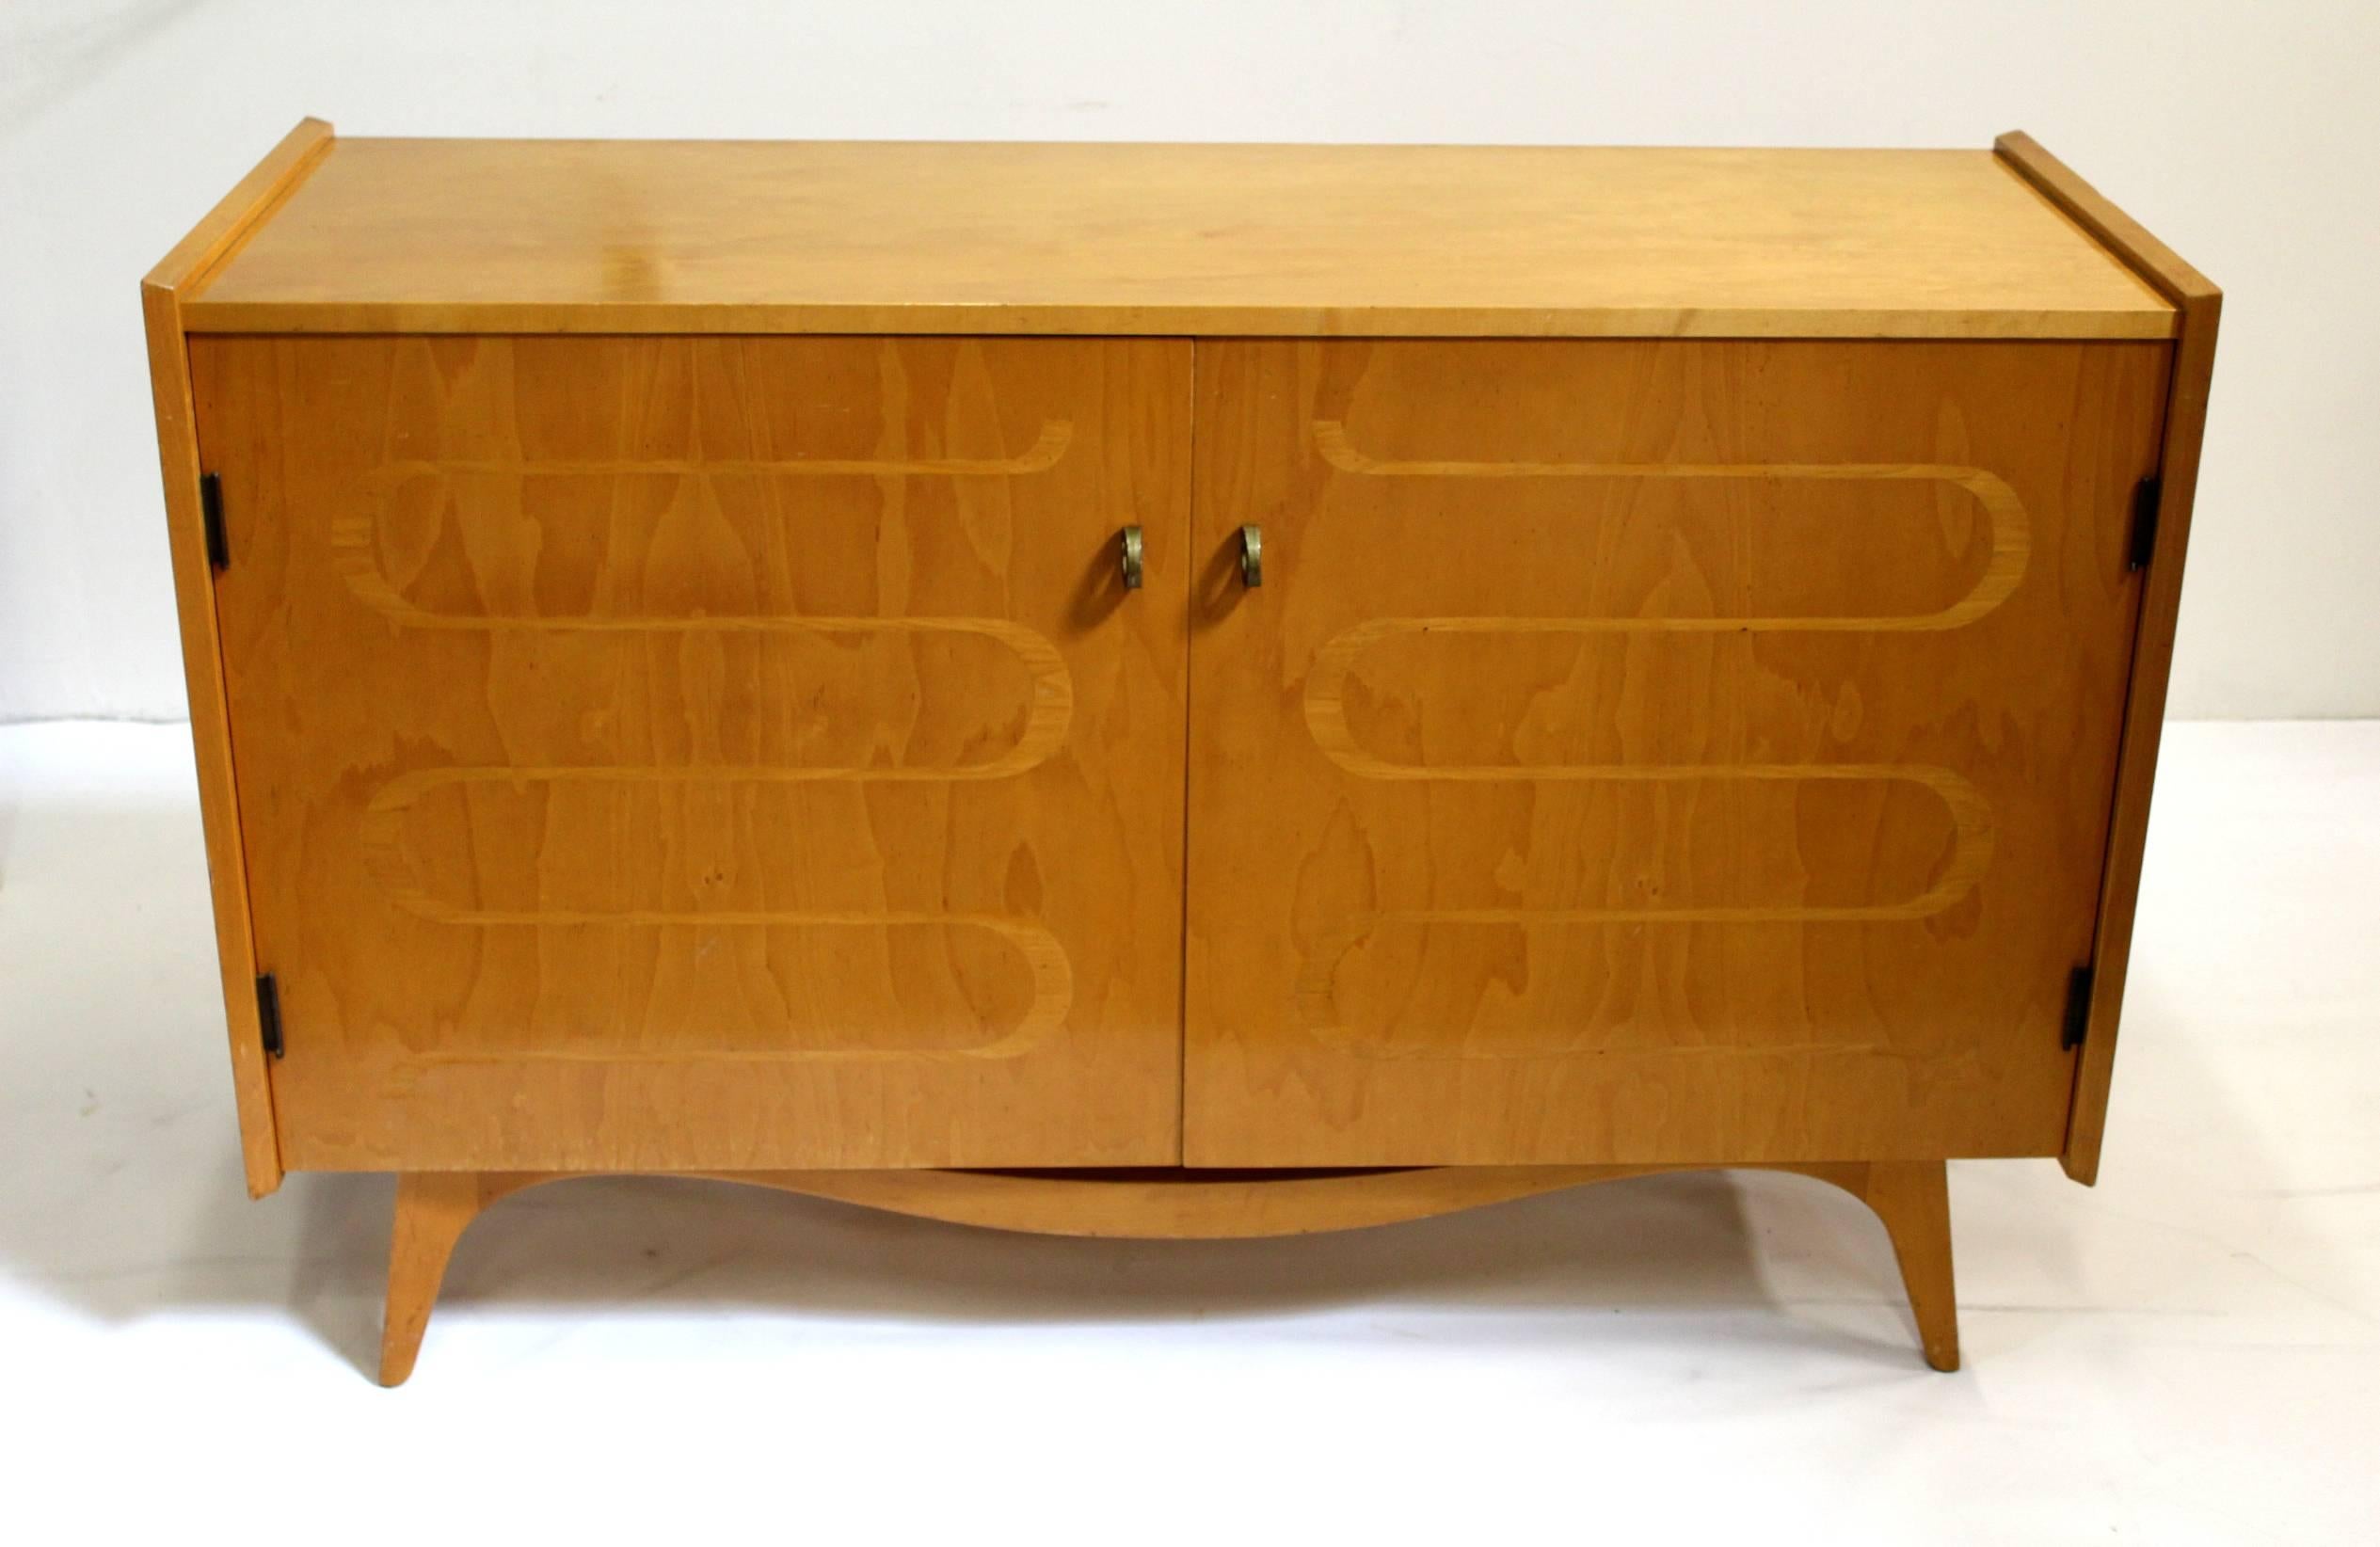 Classic Scandinavian Mid-Century design, dresser/chest with inlaid pattern on front doors, brass pulls and angled, tapered legs. Opens to reveal four shelves and eight drawers. Condition: Has small dings and scratches consistent with age, veneer